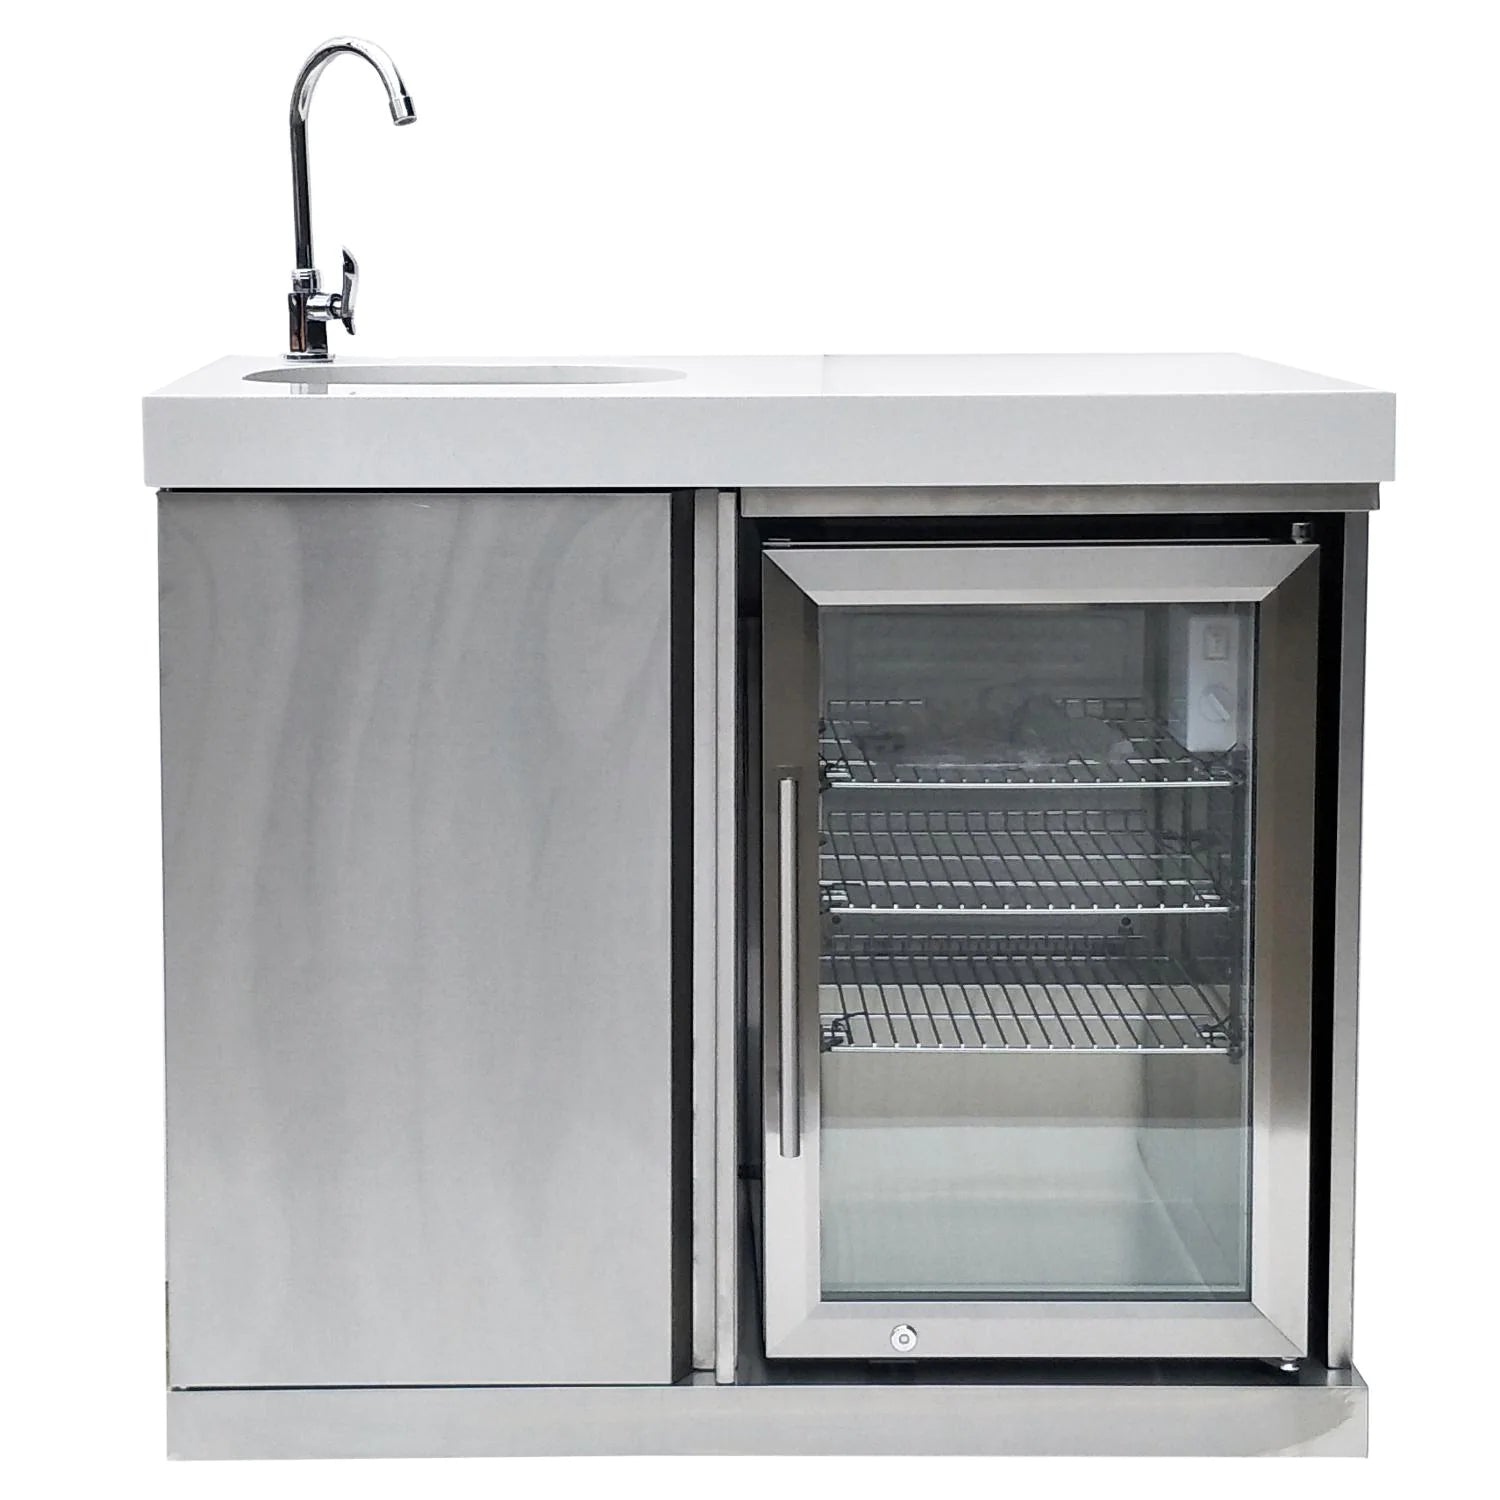 Mont Alpi Beverage Center Cabinet Module W/ Sink & 2.6 Cu. Ft. Outdoor Refrigerator - Stainless Steel - MASF - Room By The Tree 